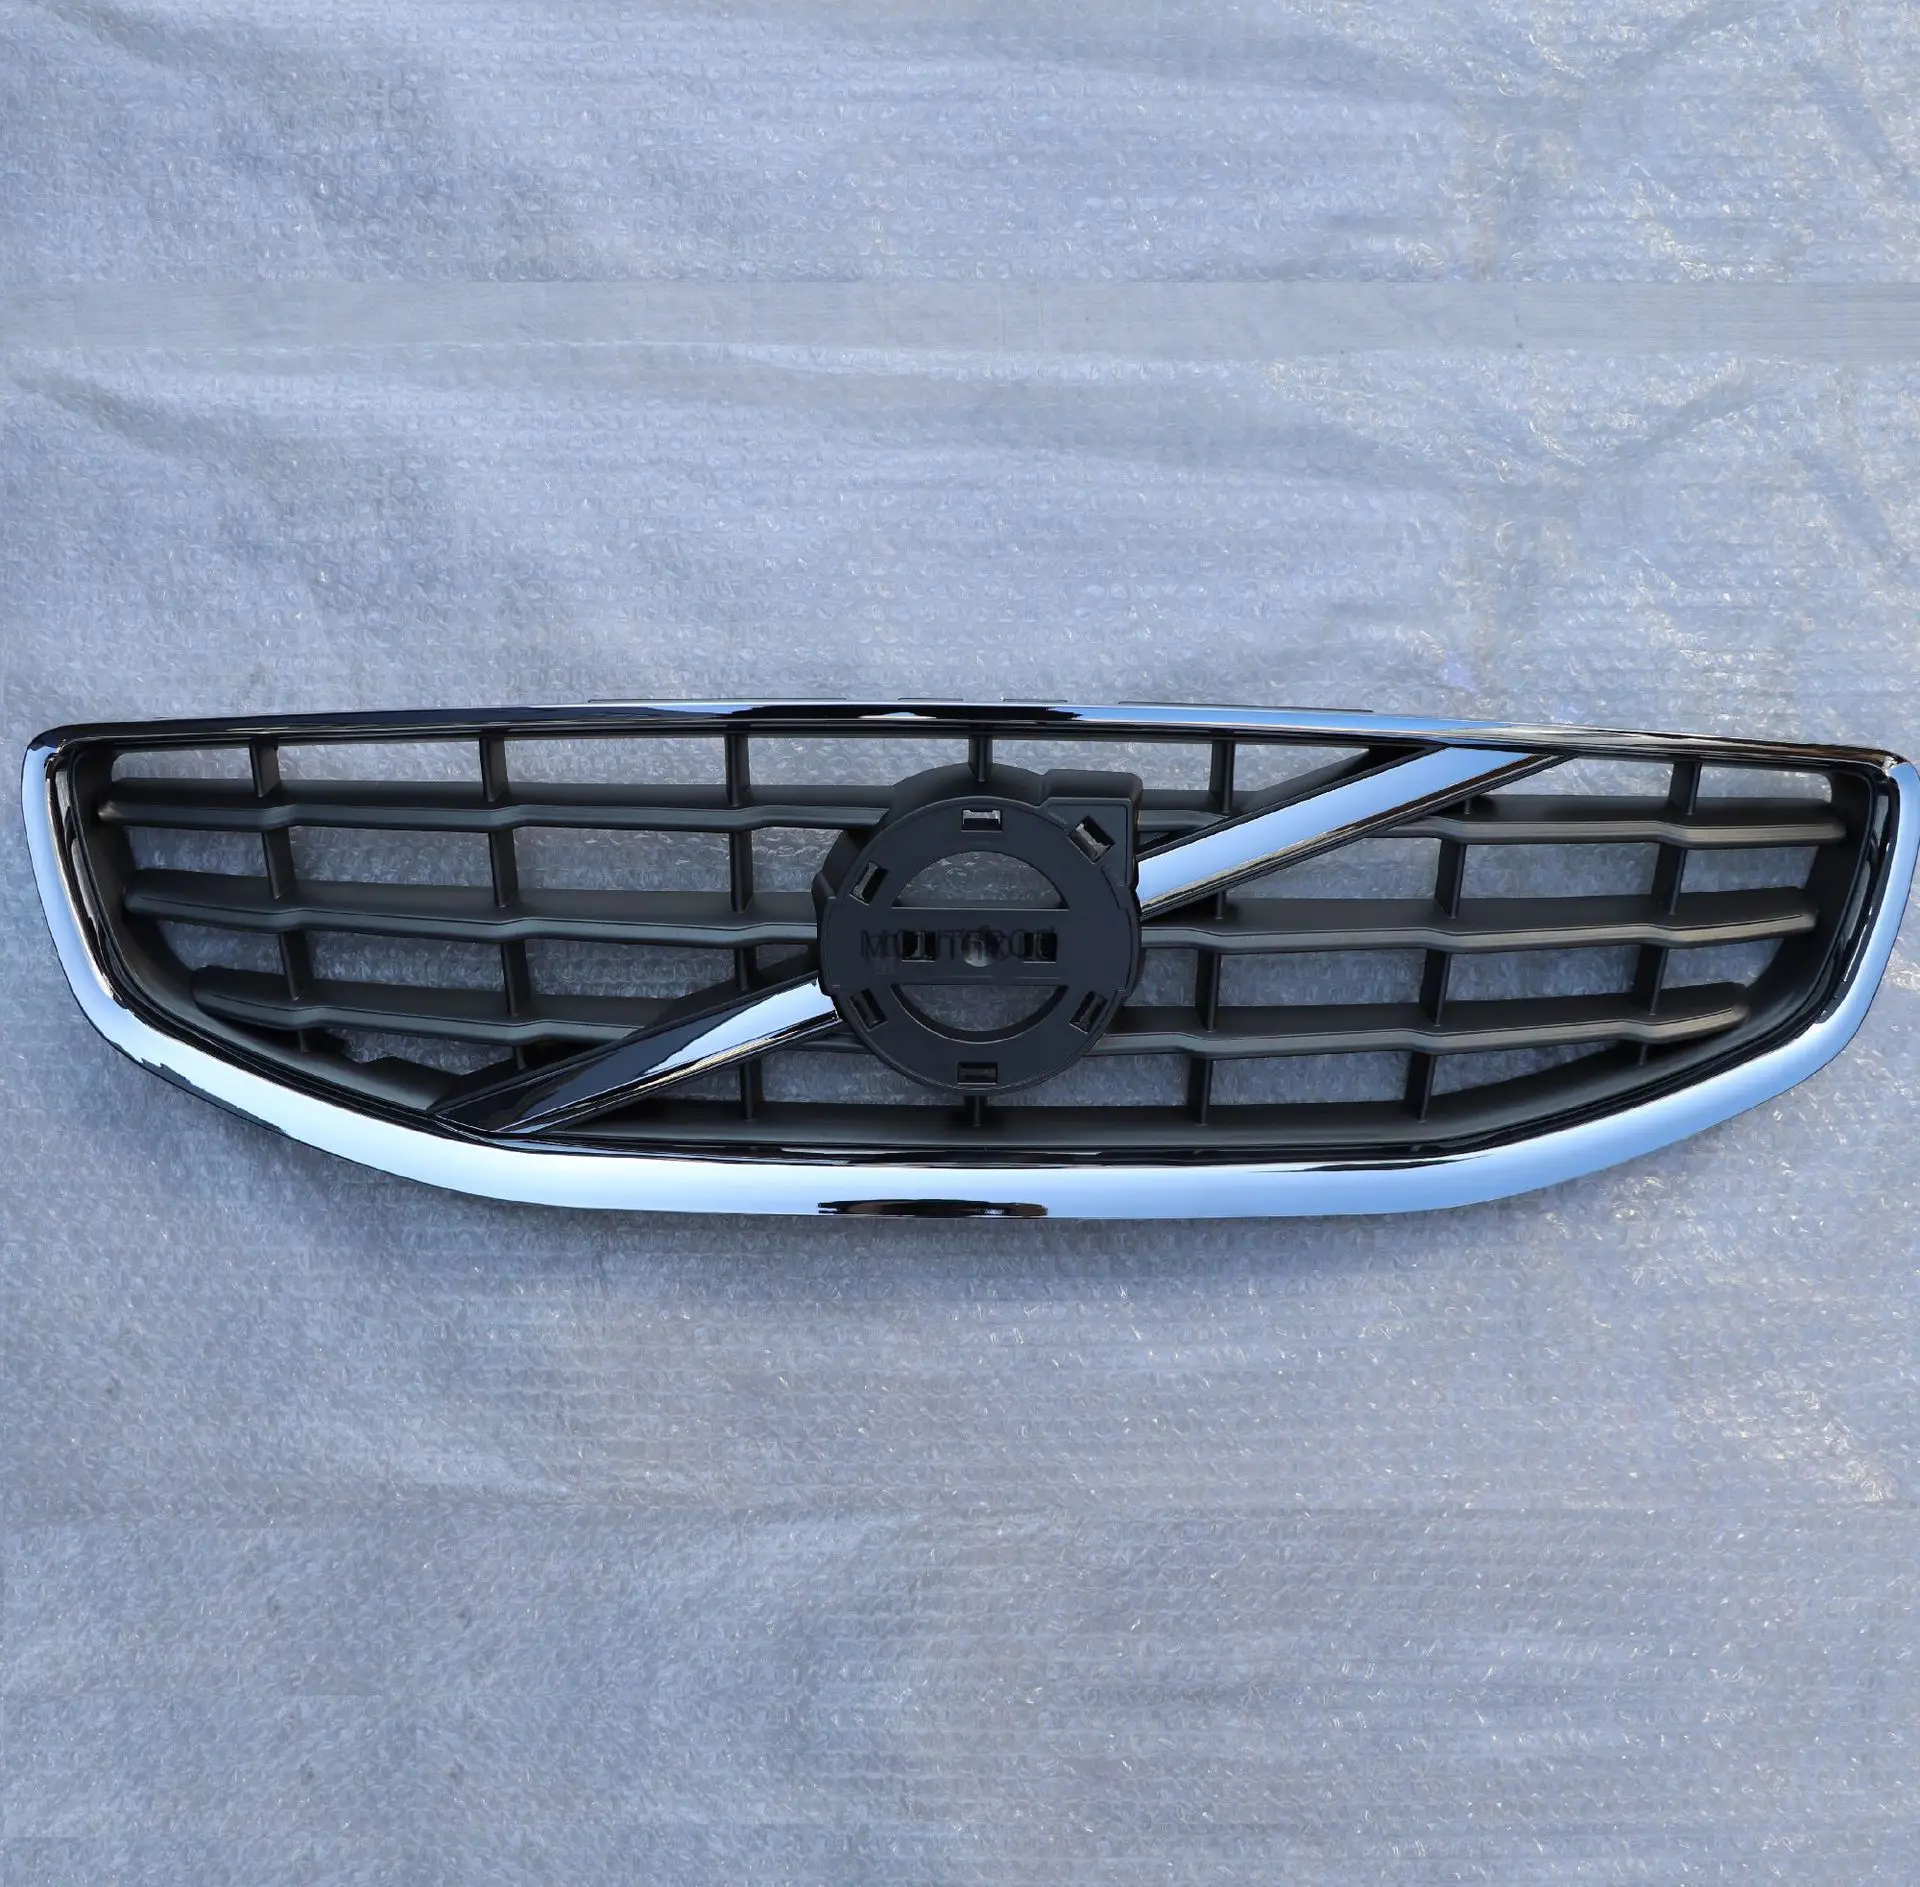 

Silver Chrome Front Bumper Grill Radiator Grille For VOLVO S60 V60 2009 2010 2011 2012 2013 31323099 31323338 30795039 31290594